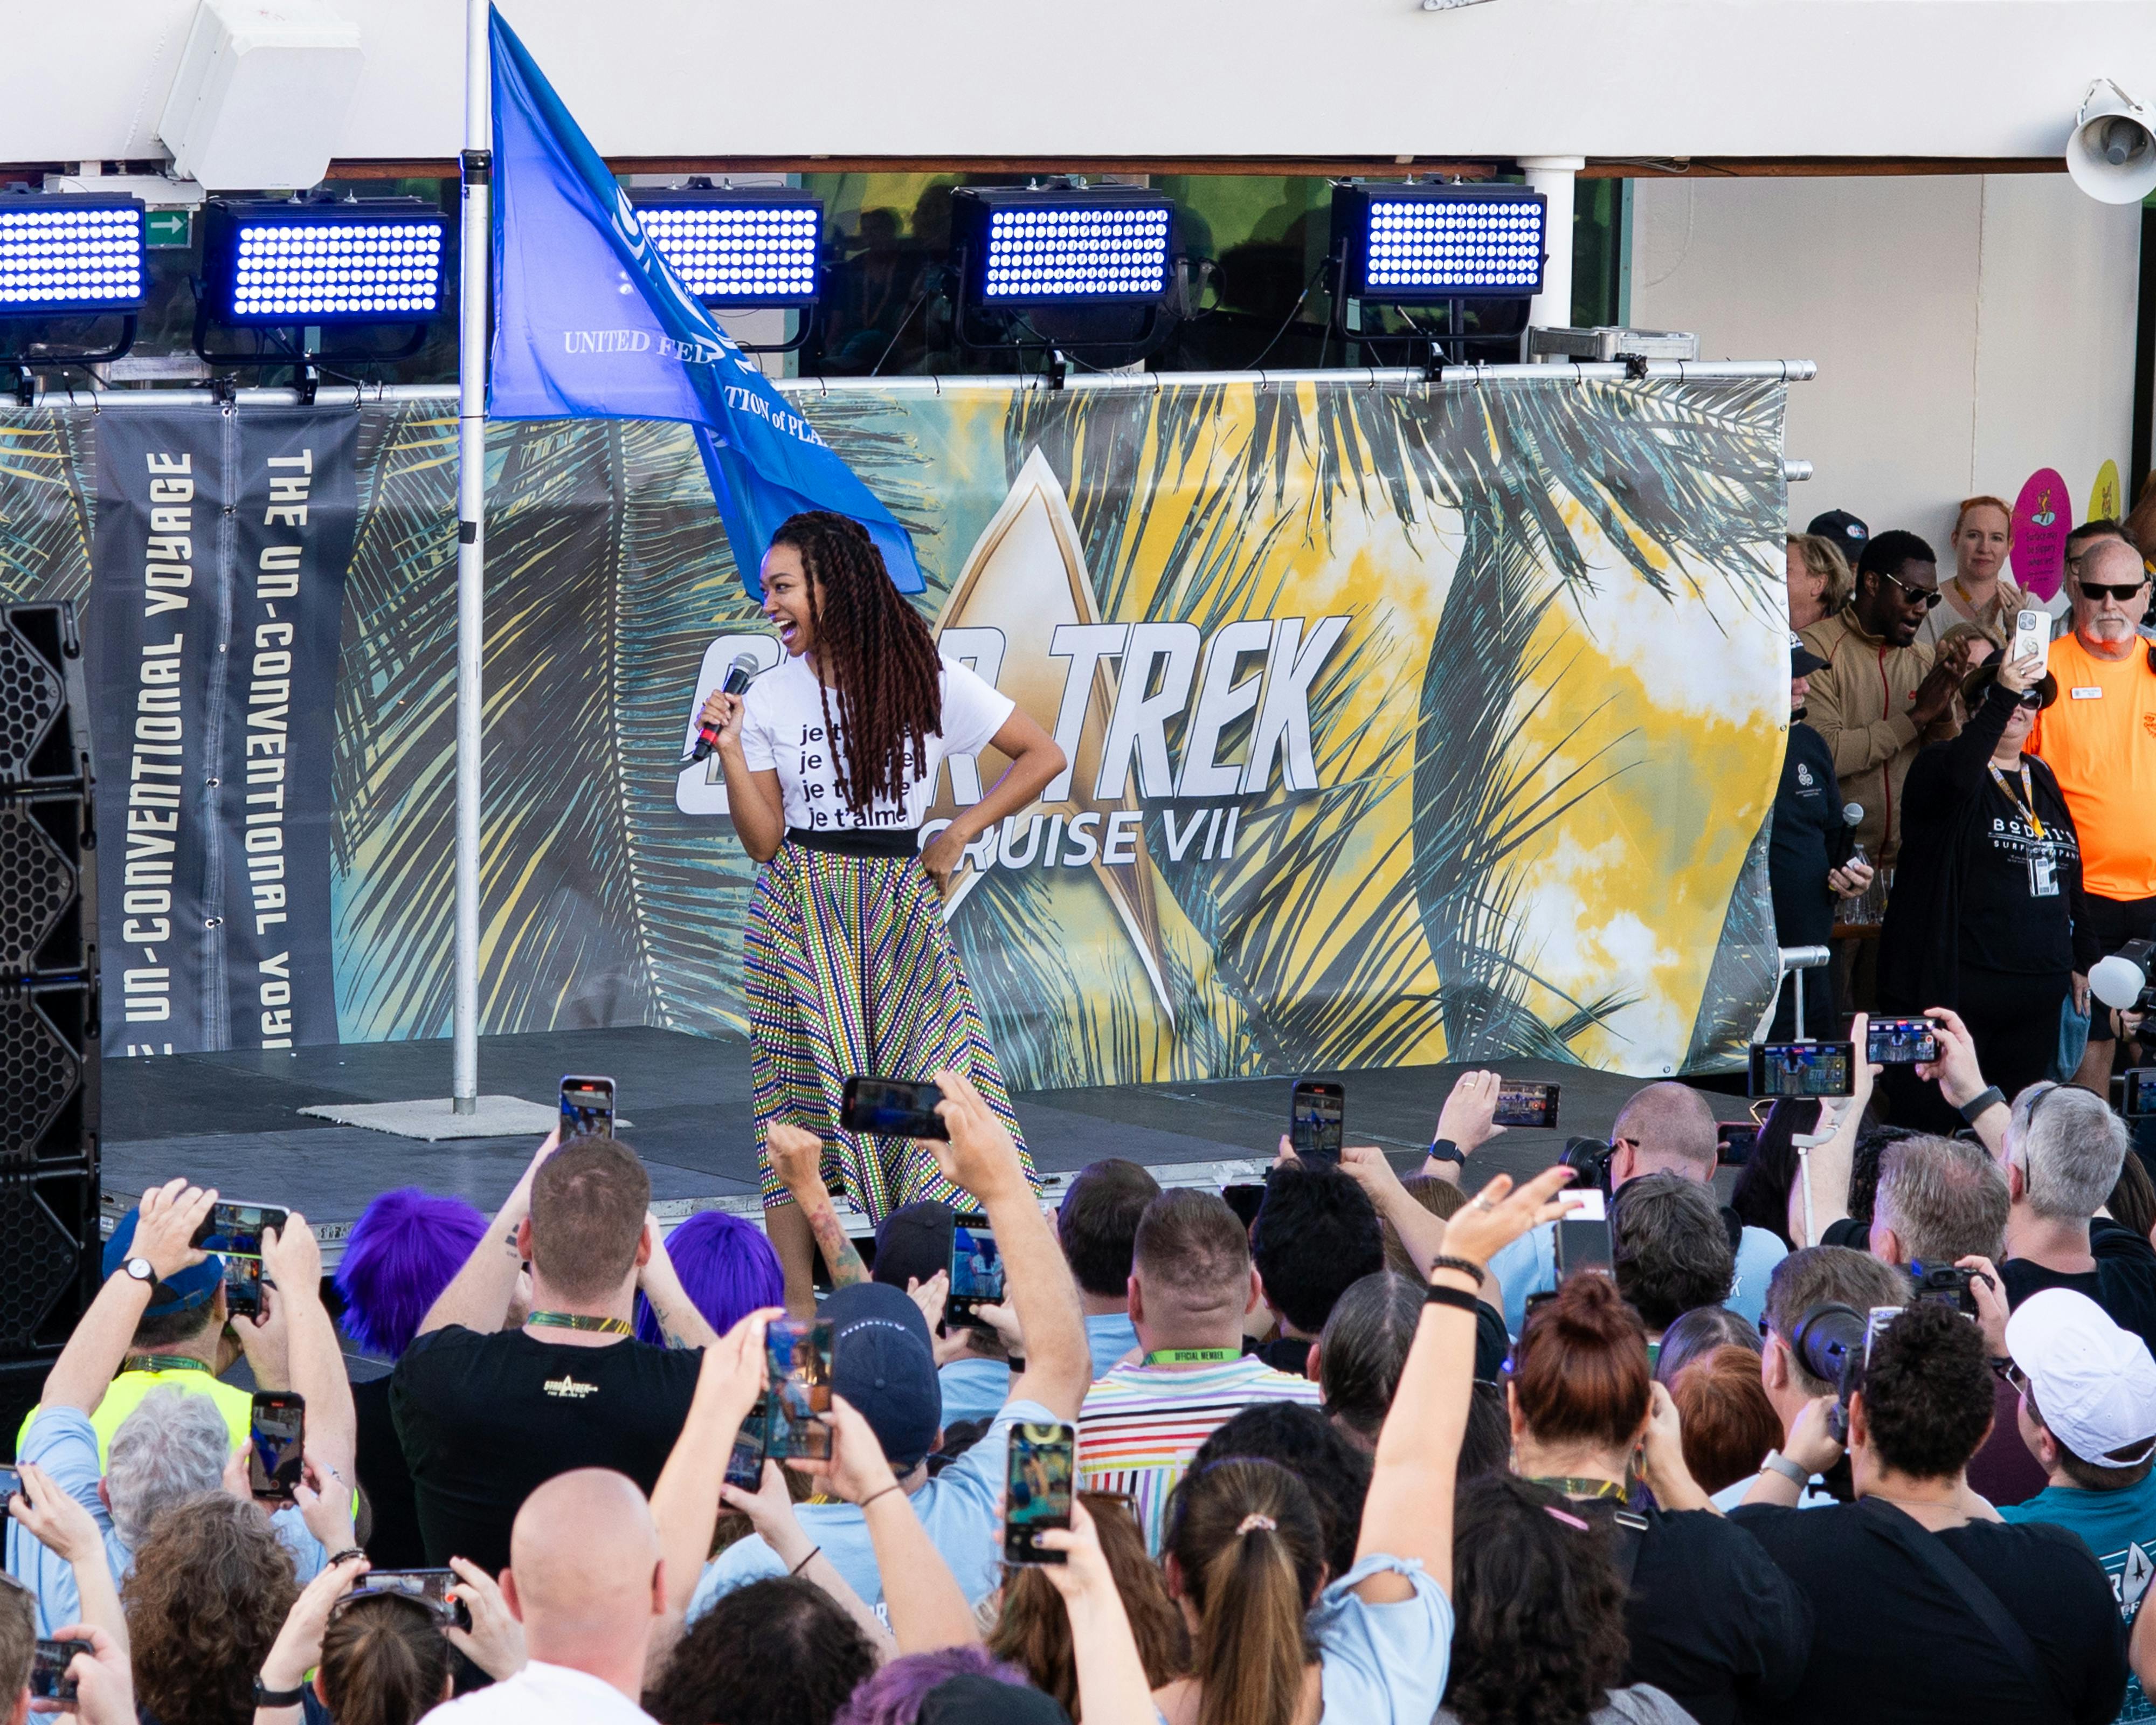 Sonequa Martin-Green greets the crowd at the sail away party at Star Trek: The Cruise VII